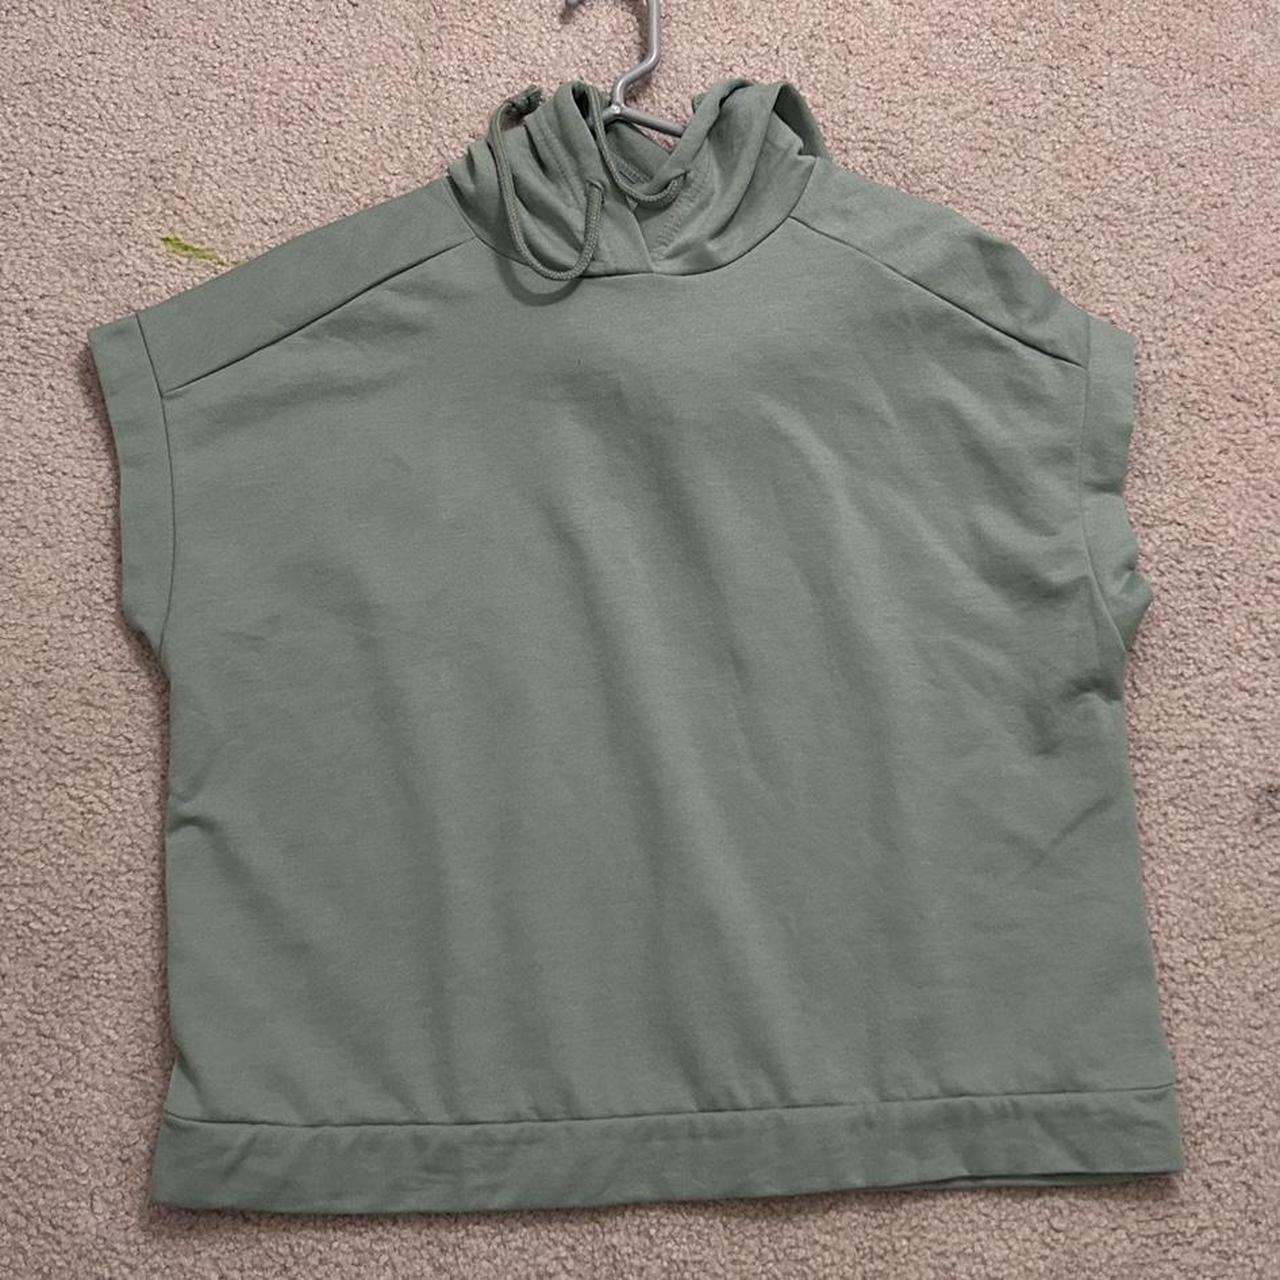 Green Short sleeve sweatshirt new without tag - Depop